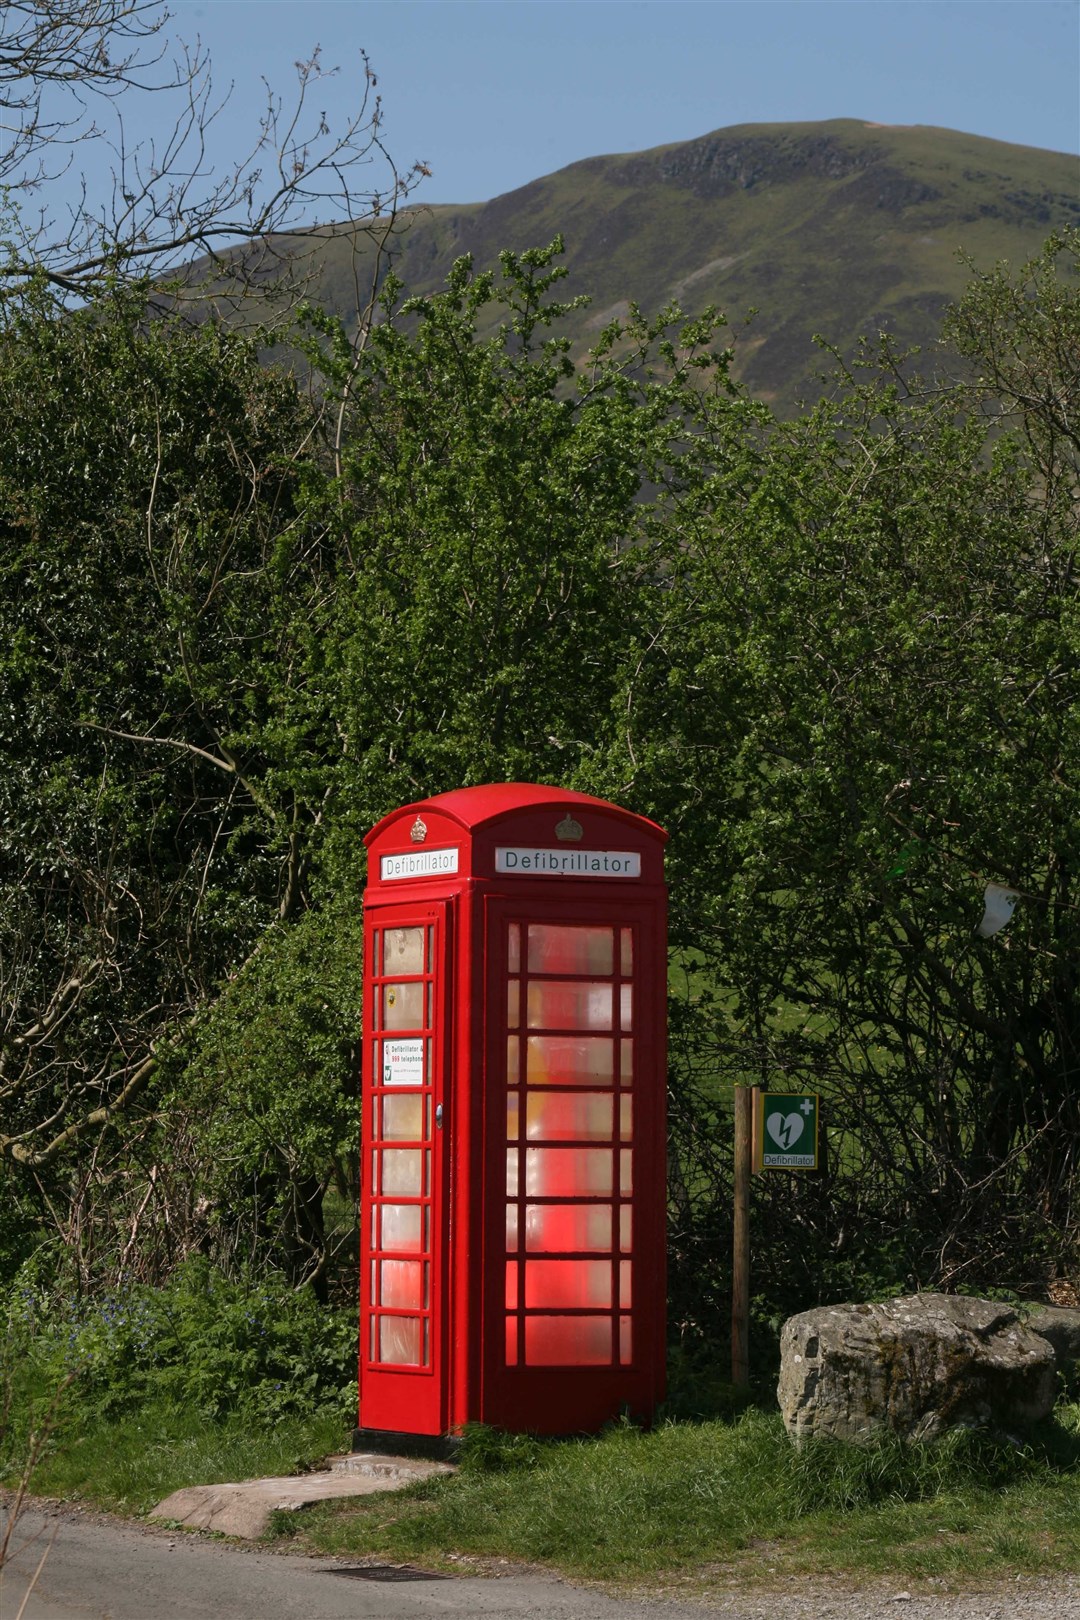 The red phone box in the Cumbrian village of Loweswater in the Lake District is the 3,000th box to be adopted in the UK under BT’s Adopt a Kiosk programme. It has been fitted with defibrillator equipment, which can help save the lives of heart attack victims, paid for by BT and installed by the Community Heartbeat Trust. The phone box was bought by the Trust for just £1 because it was no longer needed as a working payphone.